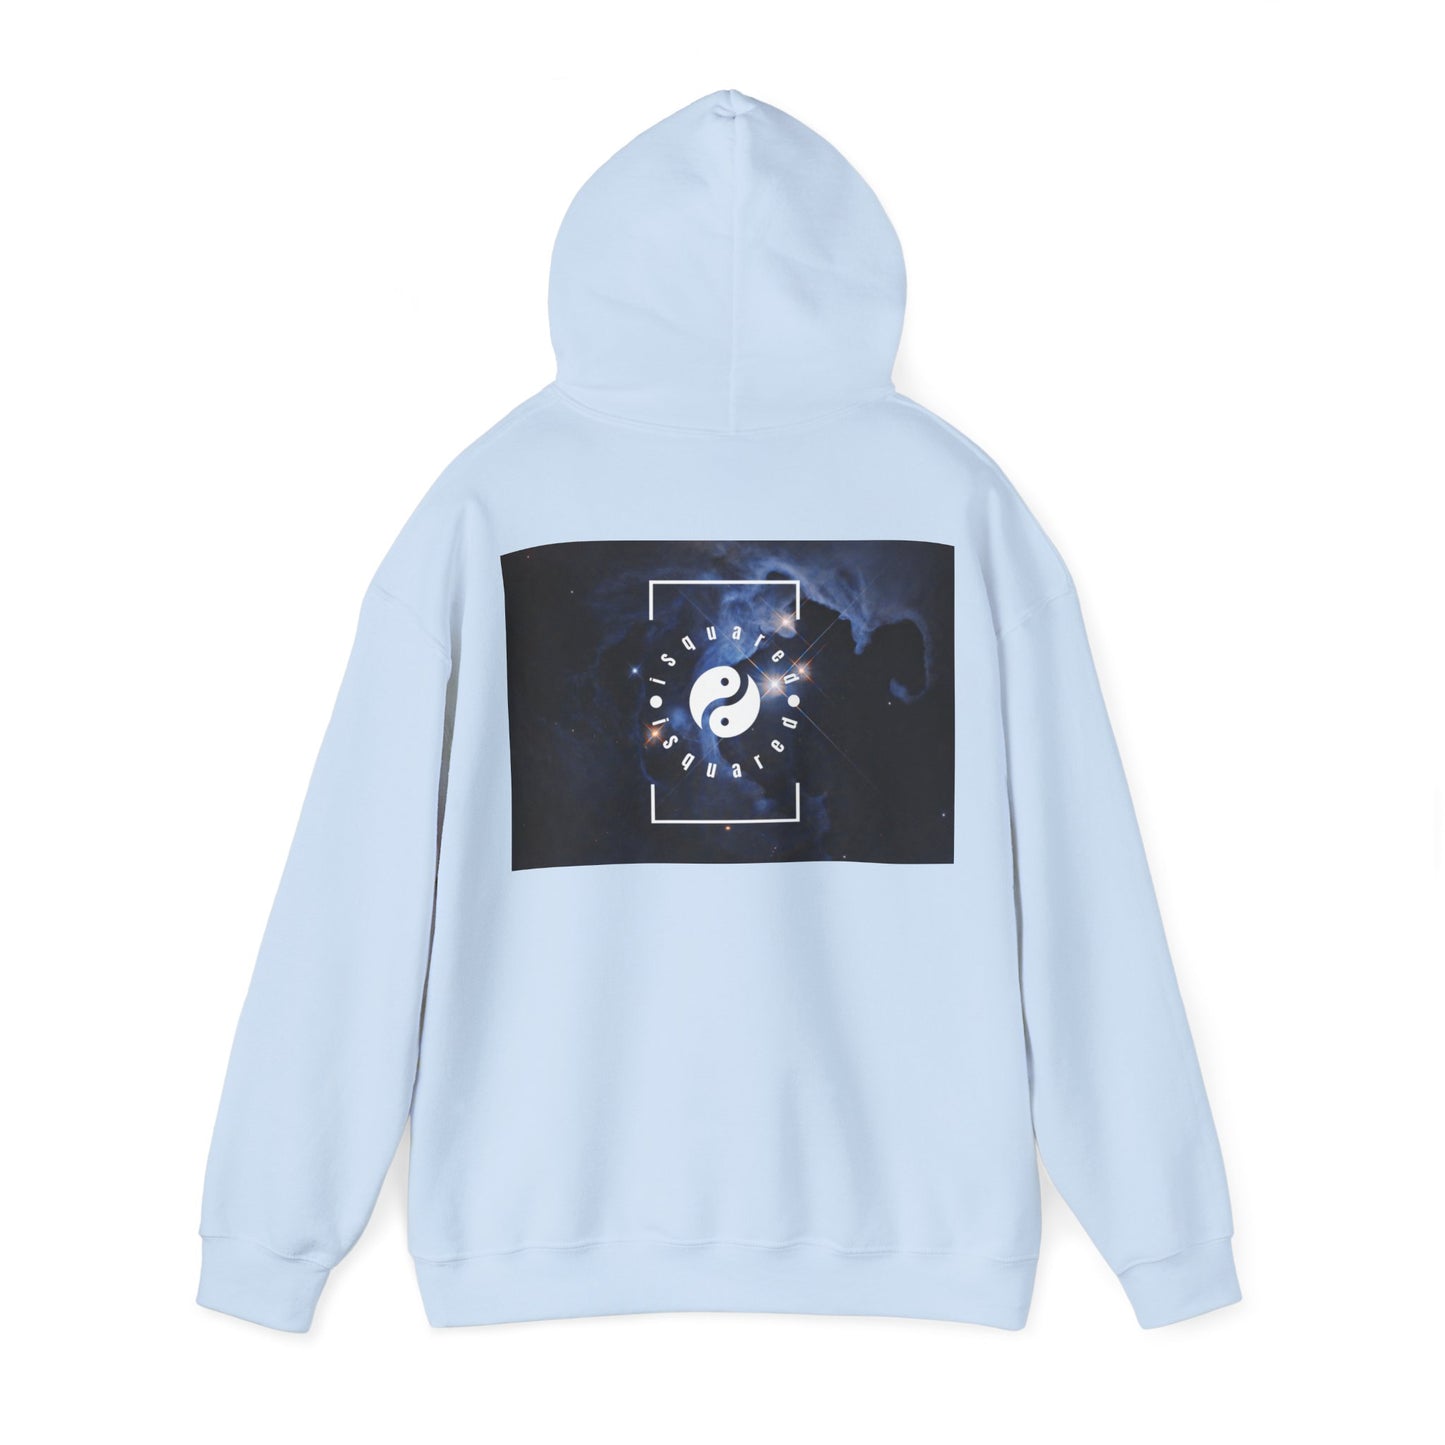 HP Tau, HP Tau G2, and G3 3 star system captured by Hubble - Hoodie